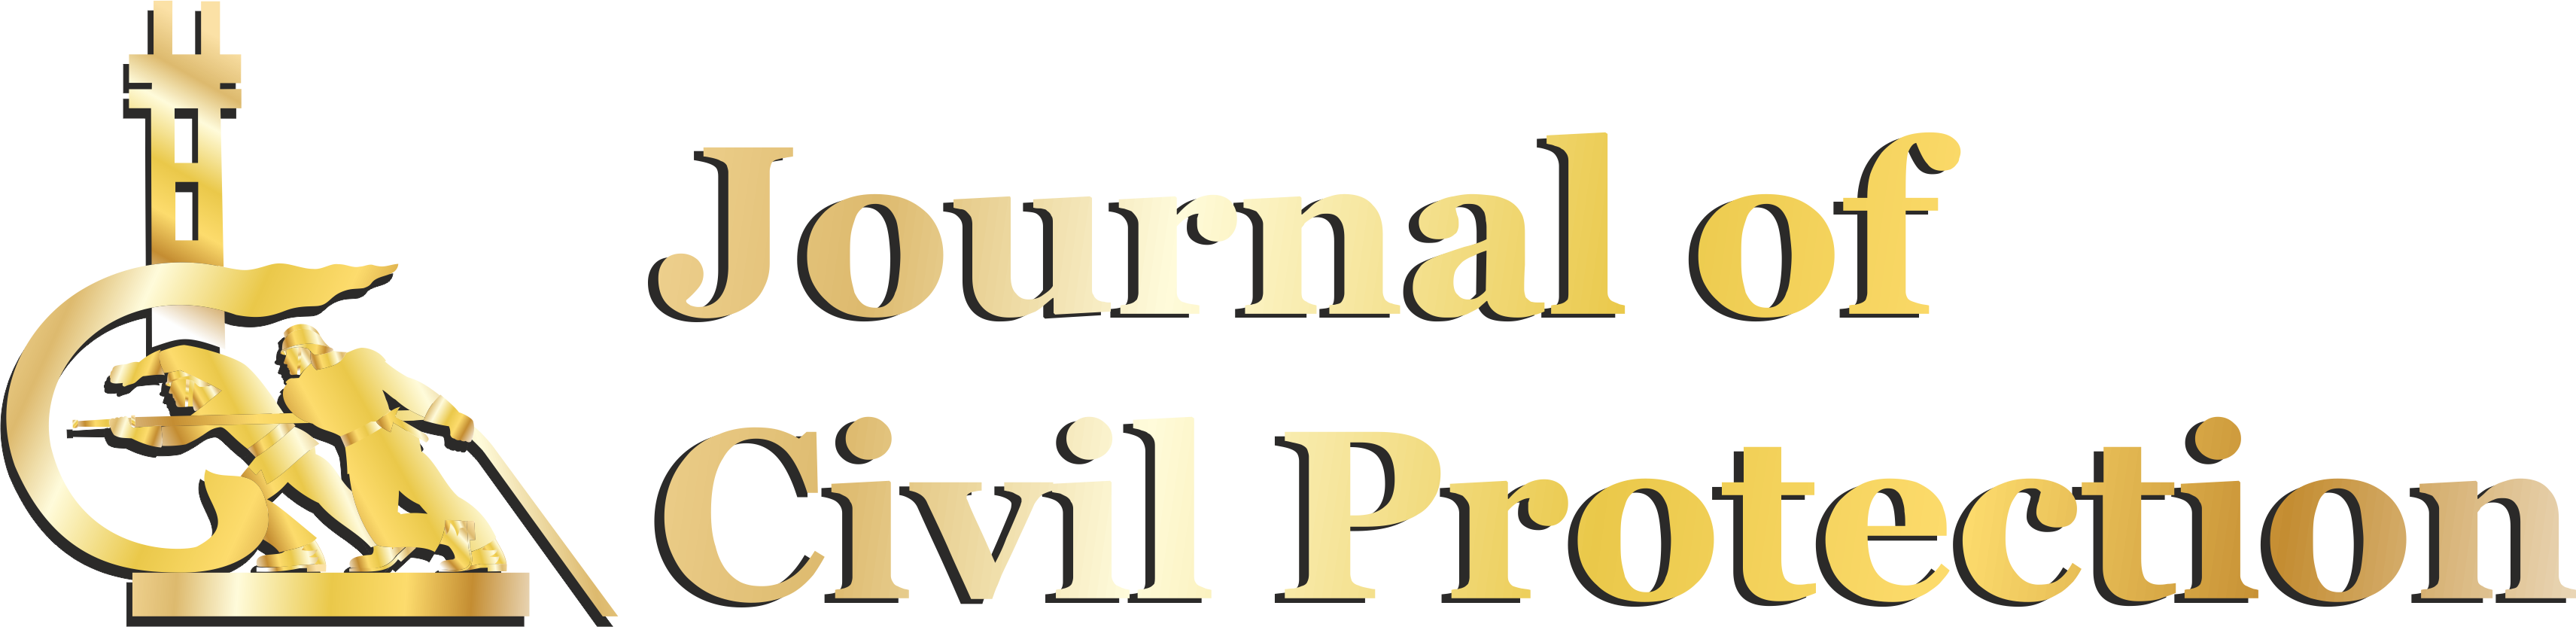 Journal of Civil Protection